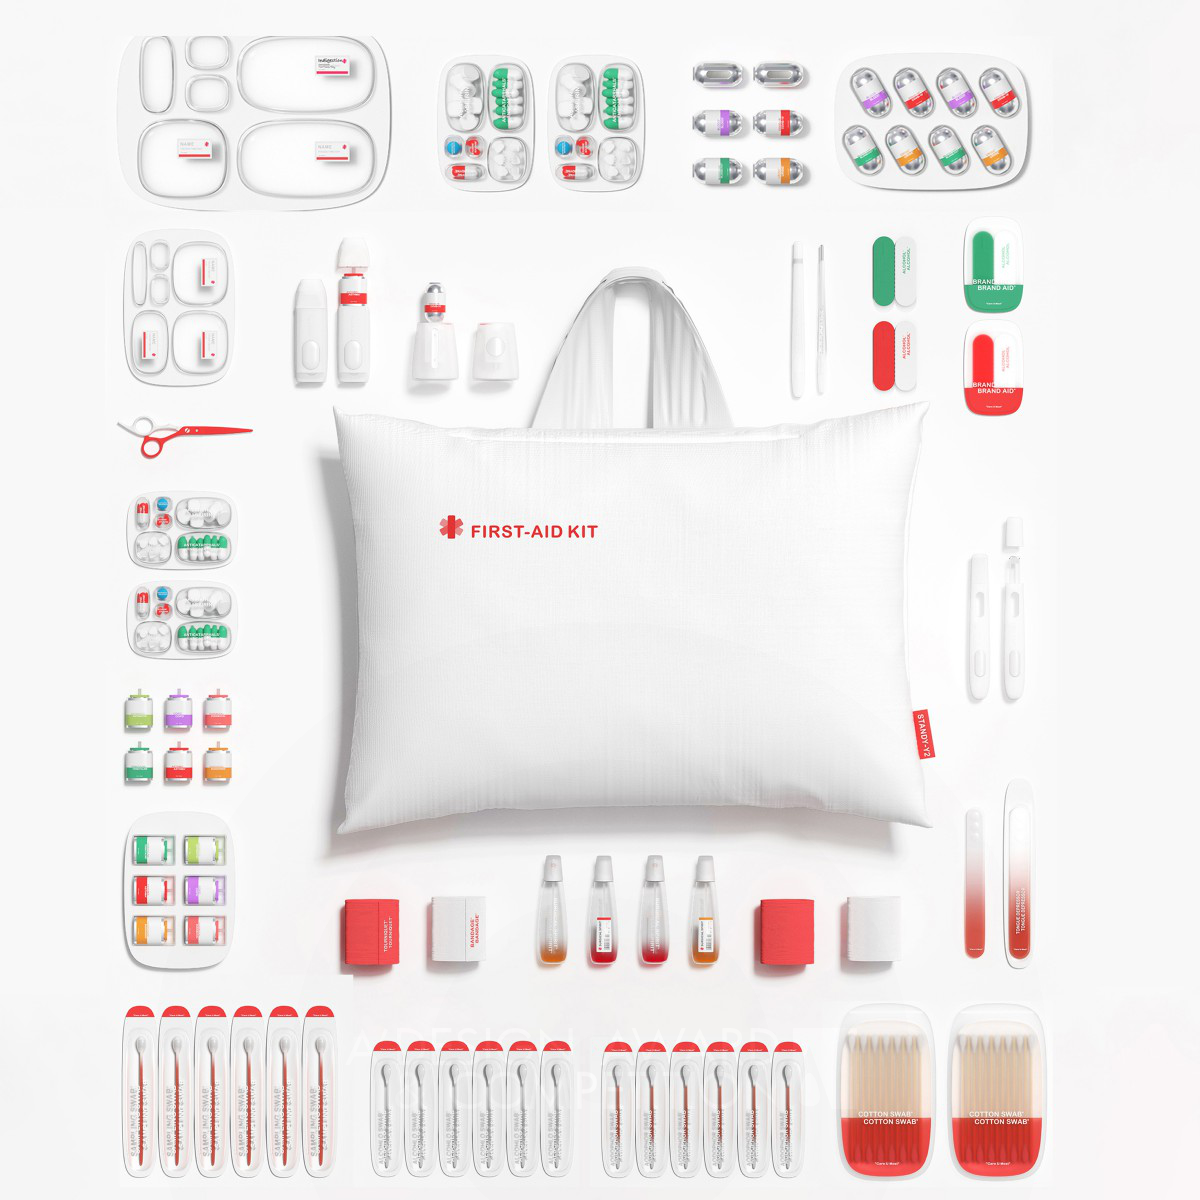 Revolutionizing Home First Aid Kits with Emotional Design